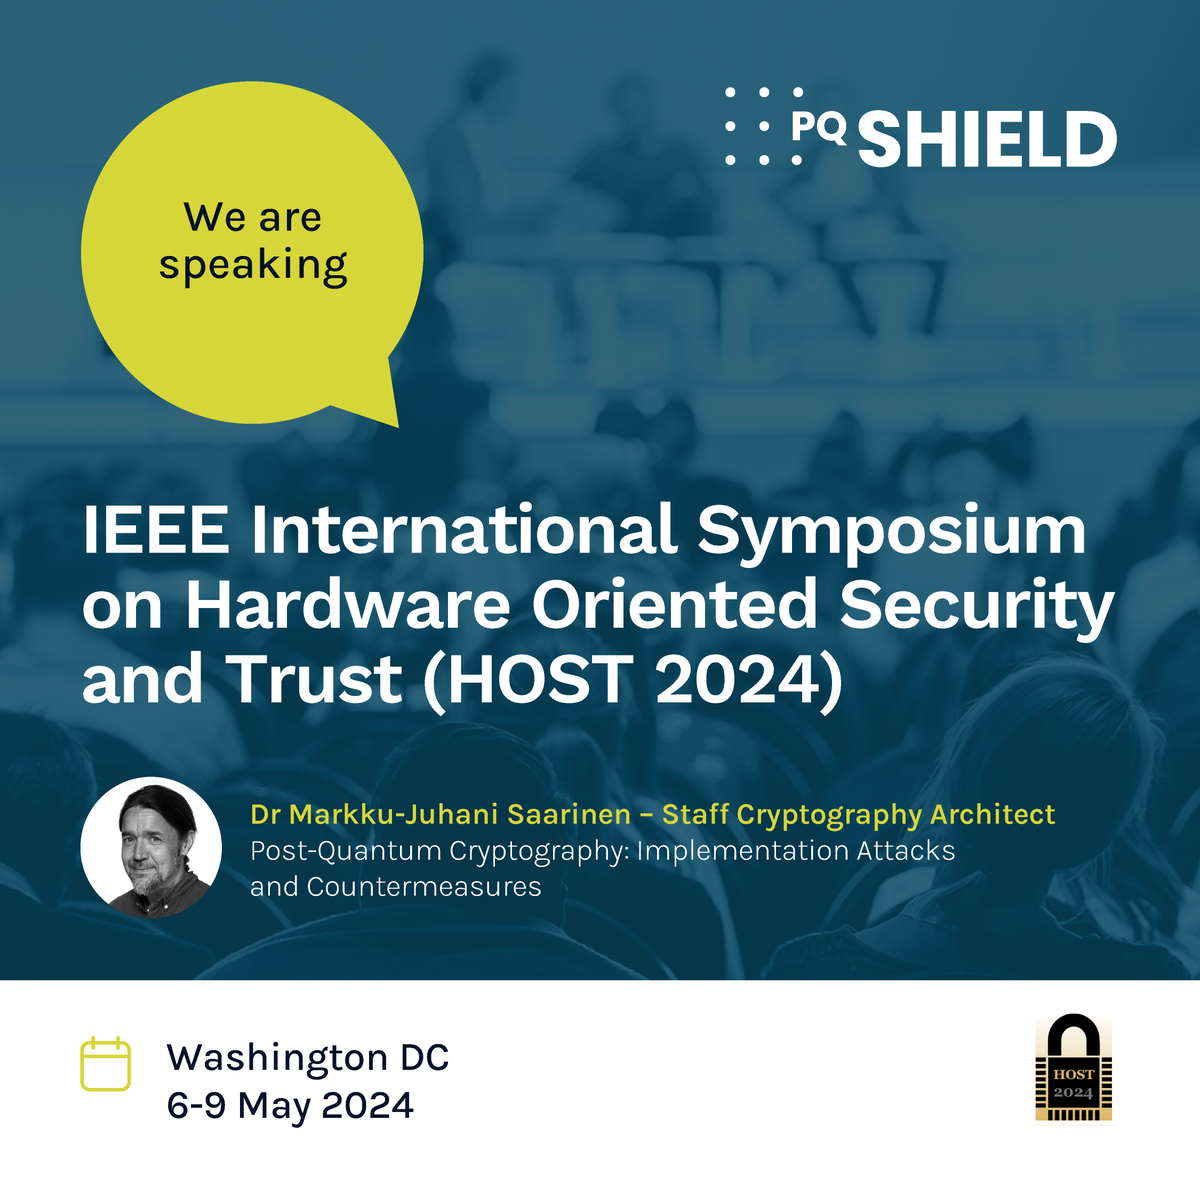 We look forward to attending @HOST_IEEE 2024, where our Staff Cryptography Architect Dr Markku Saarinen will be speaking on – Post-Quantum Cryptography: Implementation Attacks and Countermeasures. We hope to see you in Washington on the 6-9 May 2024. #cryptography #postquantum